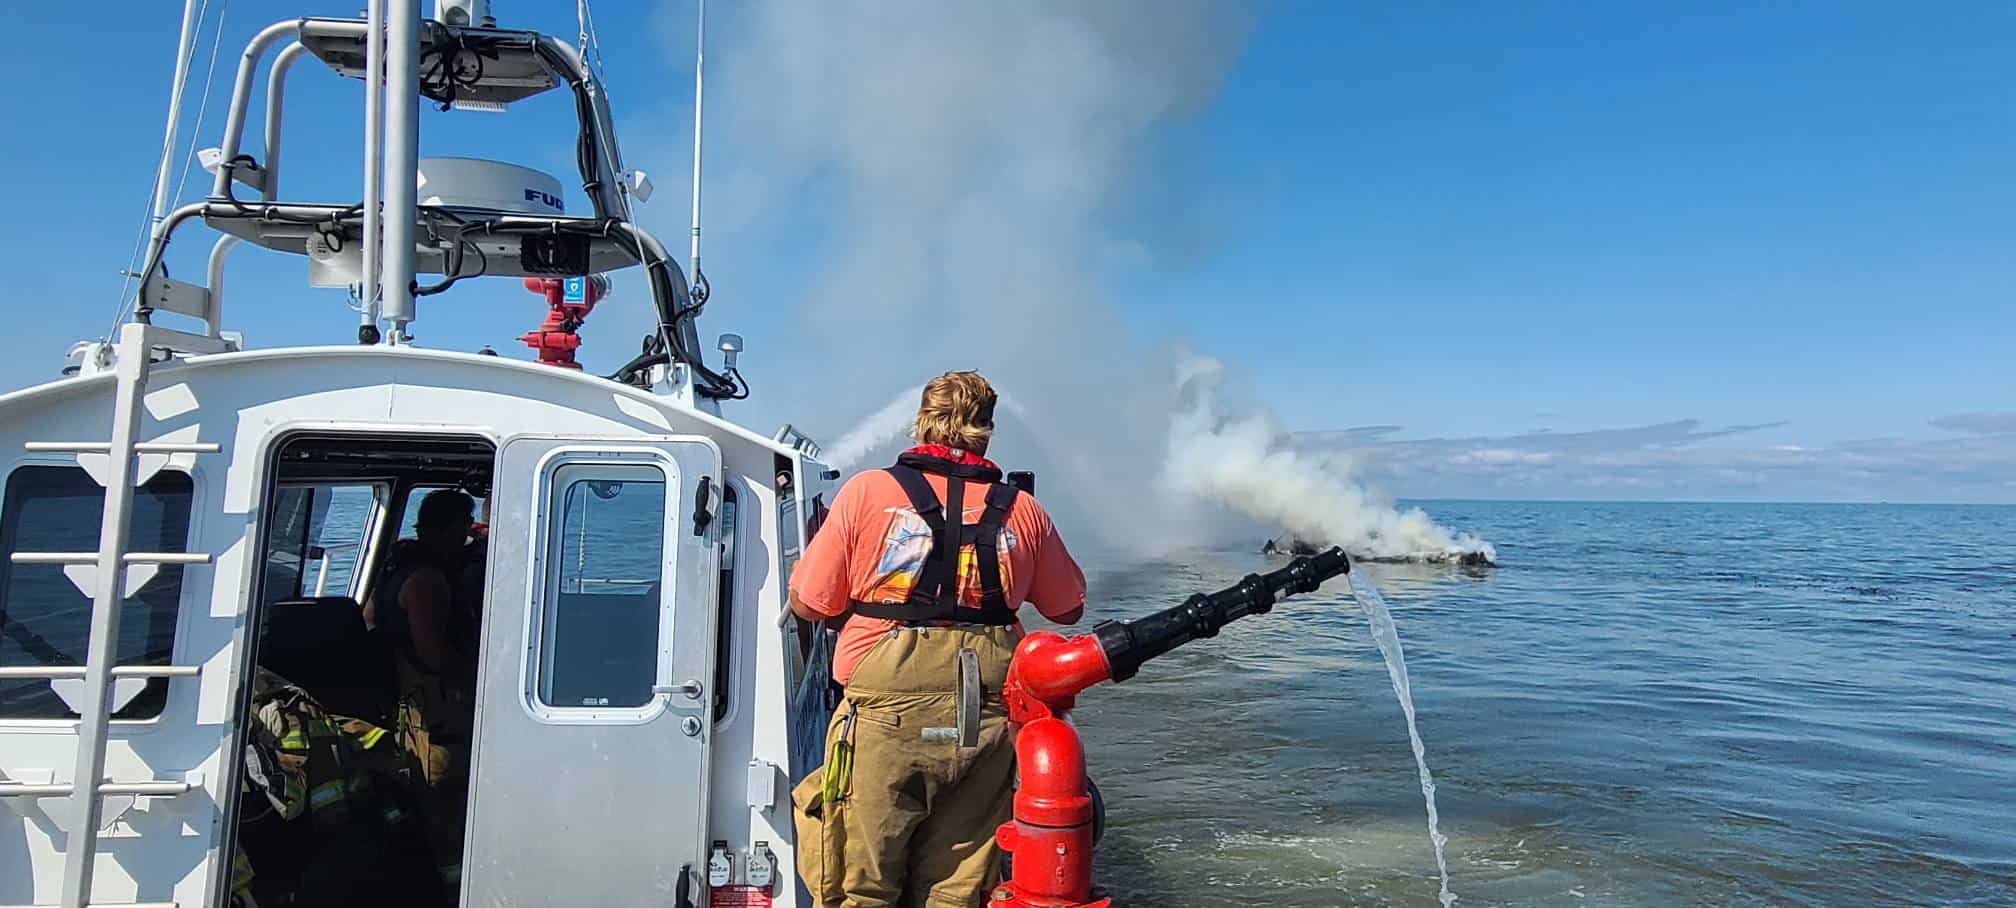 Firefighters Put Out Boat Fire On Delaware Bay